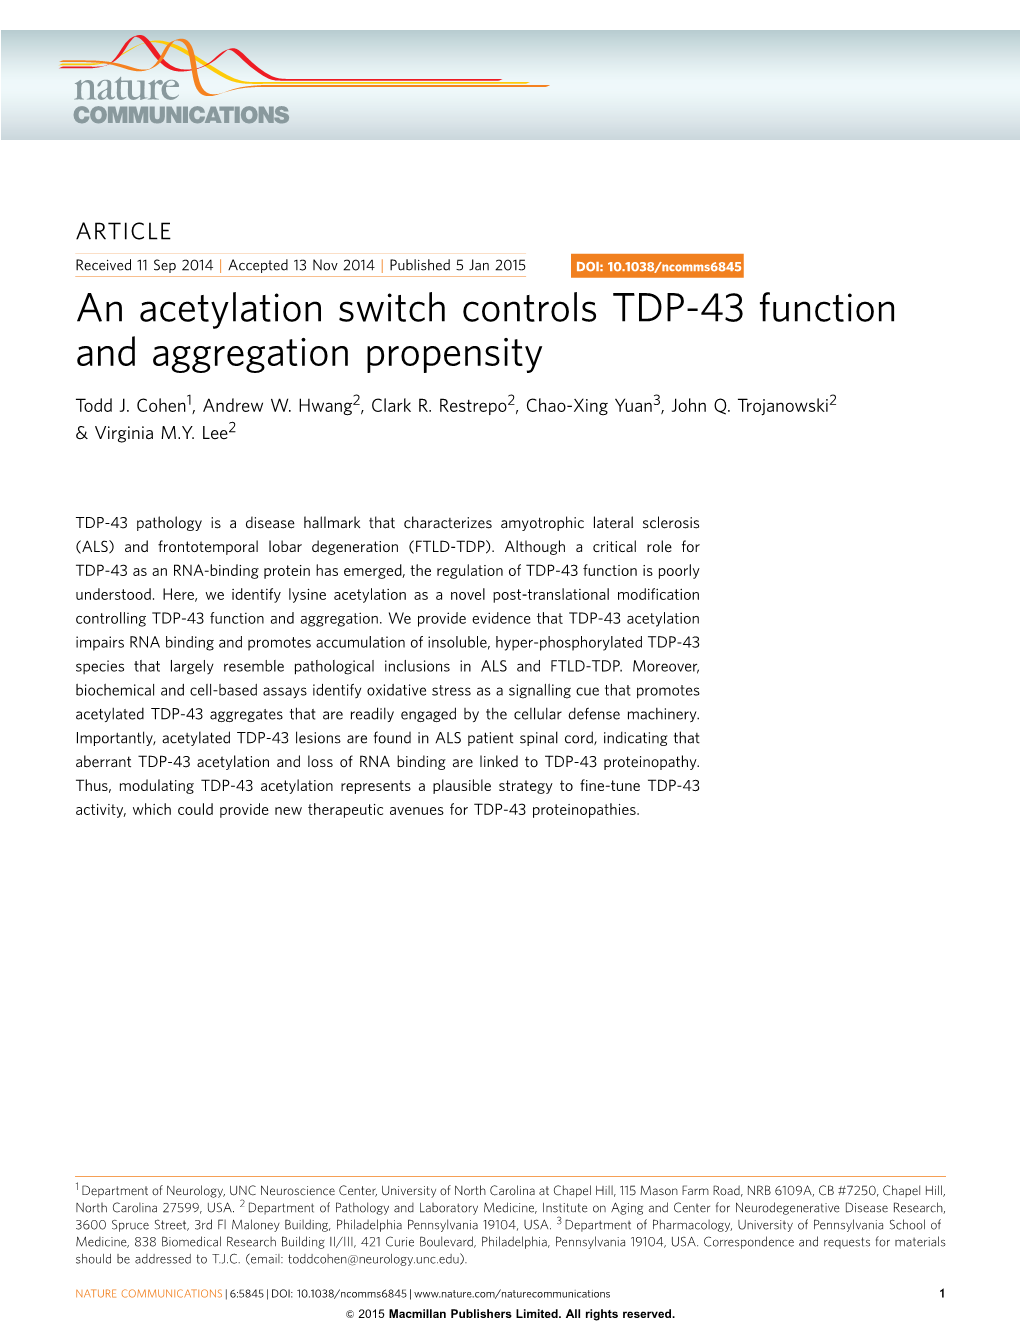 An Acetylation Switch Controls TDP-43 Function and Aggregation Propensity